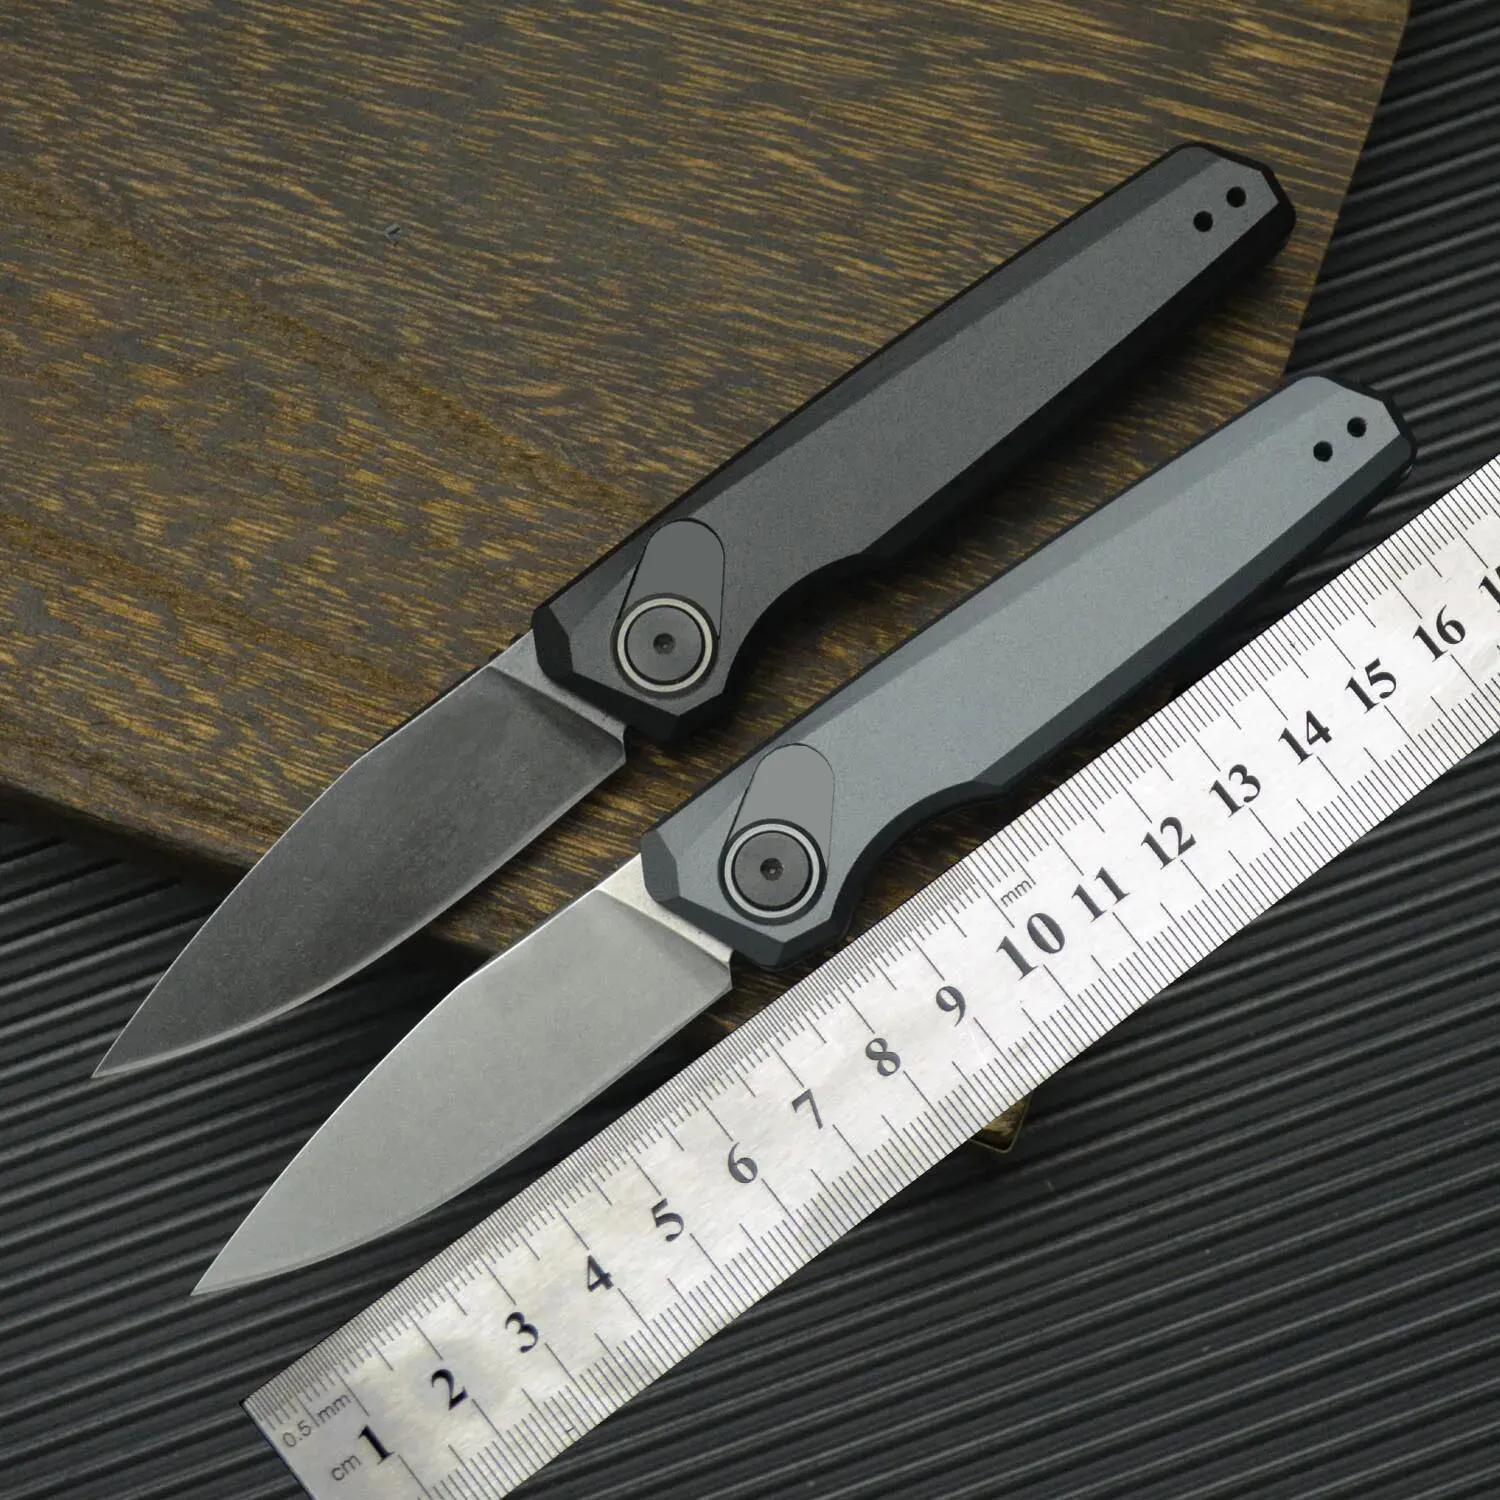 2Models 7551 Launch 18 AUTO Folding Knife 2.79" CPM-154 Stonewashed Drop Point Blade Aluminum Handles Outdoor Hiking Tactical 7551BLK Camp Hunt EDC Tools